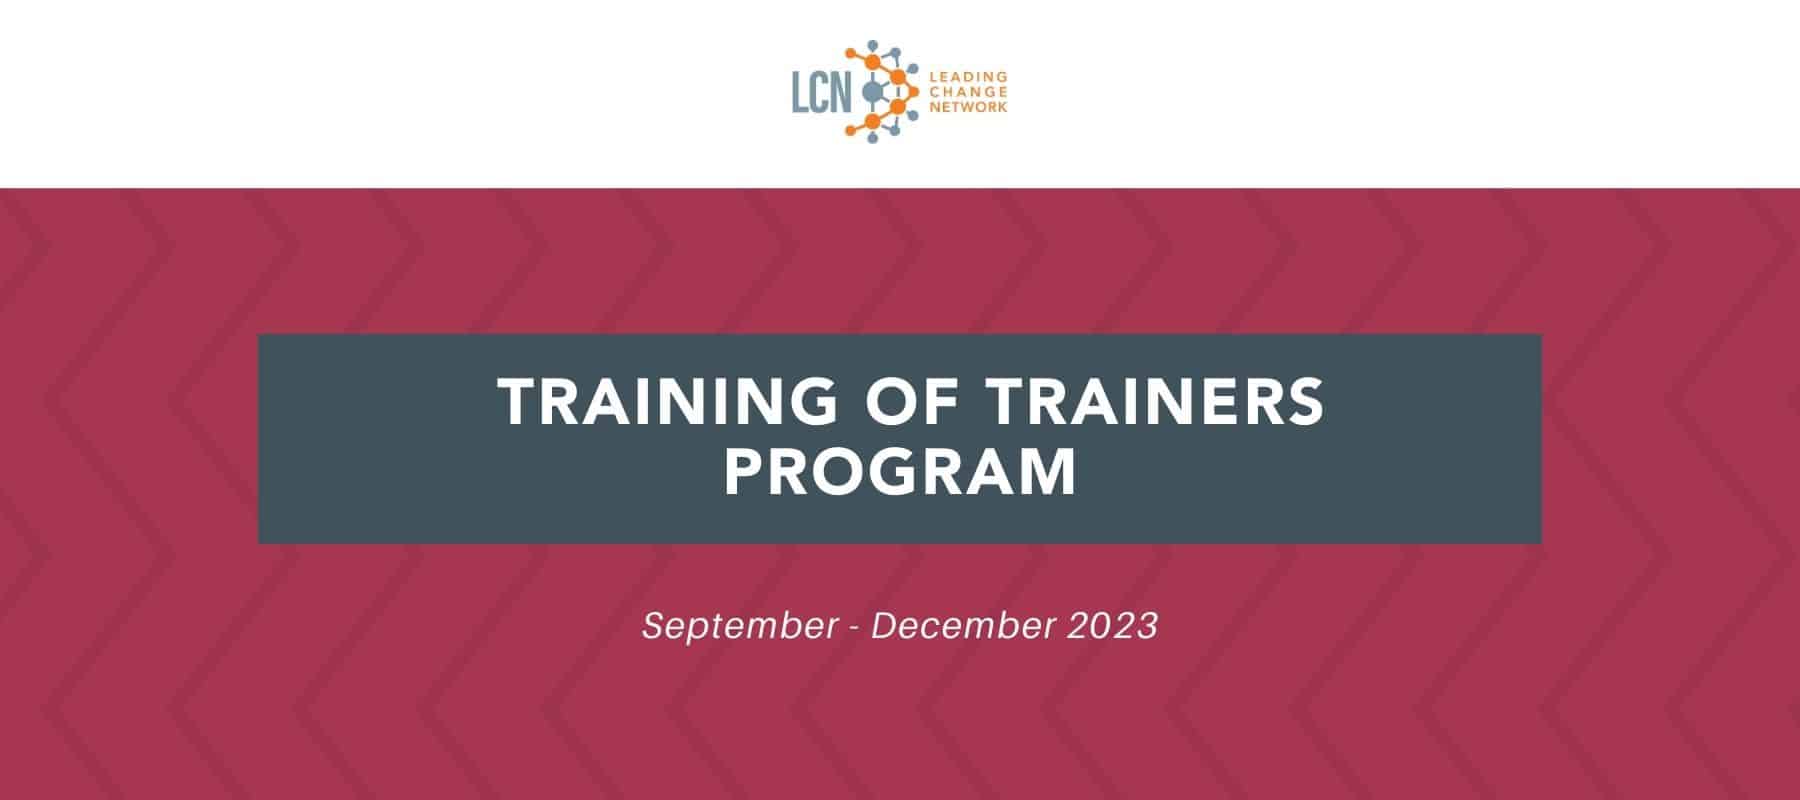 Selection process for LCN's Training of Trainers Program of Fall 2023 ...